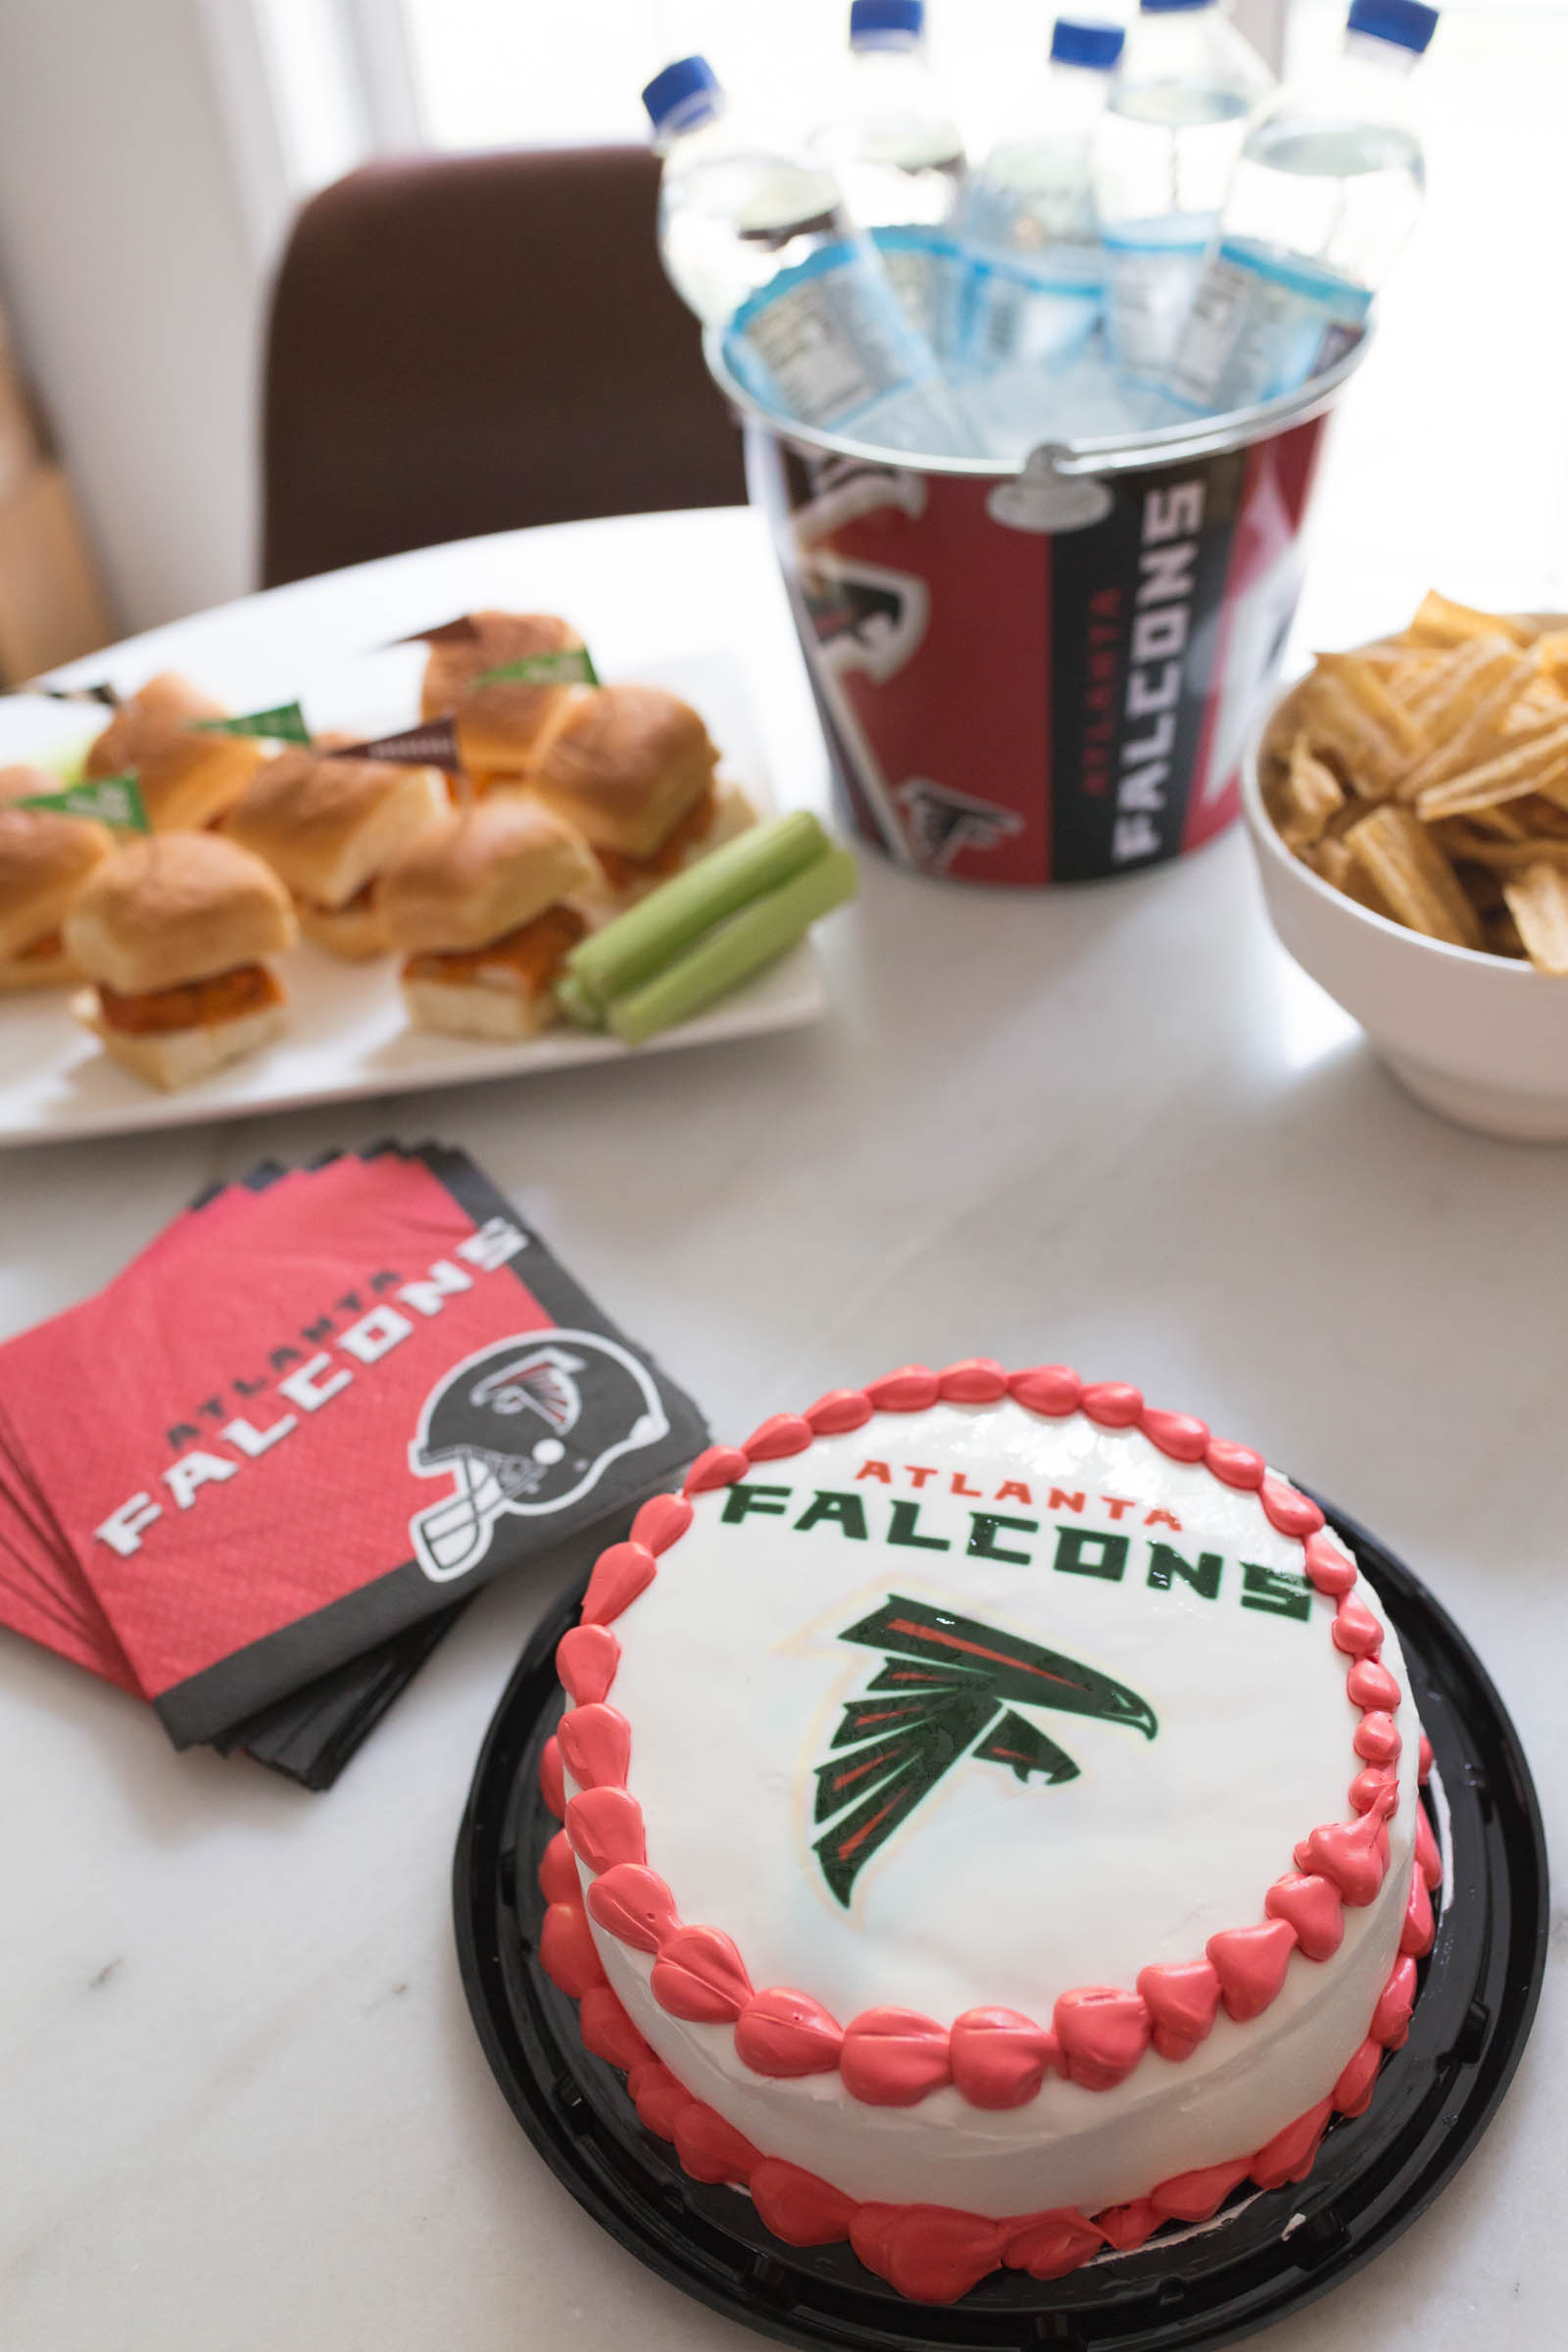 Kicking off Football season with NFL Game Day Ideas featuring DecoPac